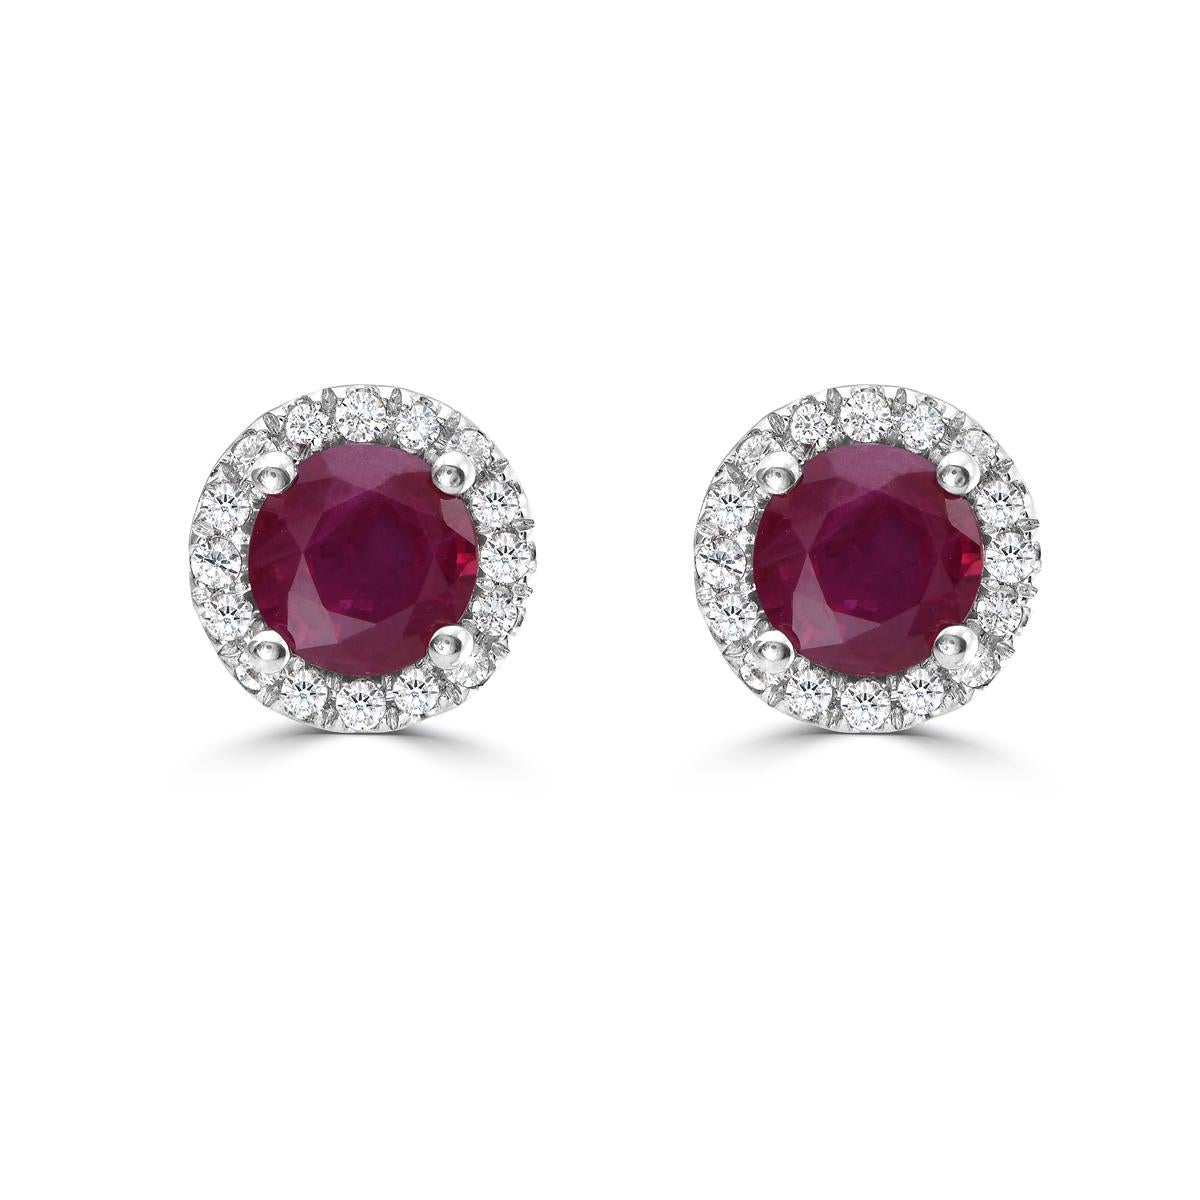 Elevate your look with our exquisite Ruby and Diamond Halo Martini Stud Earrings. The perfect blend of luxury and sophistication, these ruby stud earrings are crafted with stunning diamonds and lustrous gold for a truly exclusive feel. Add a touch